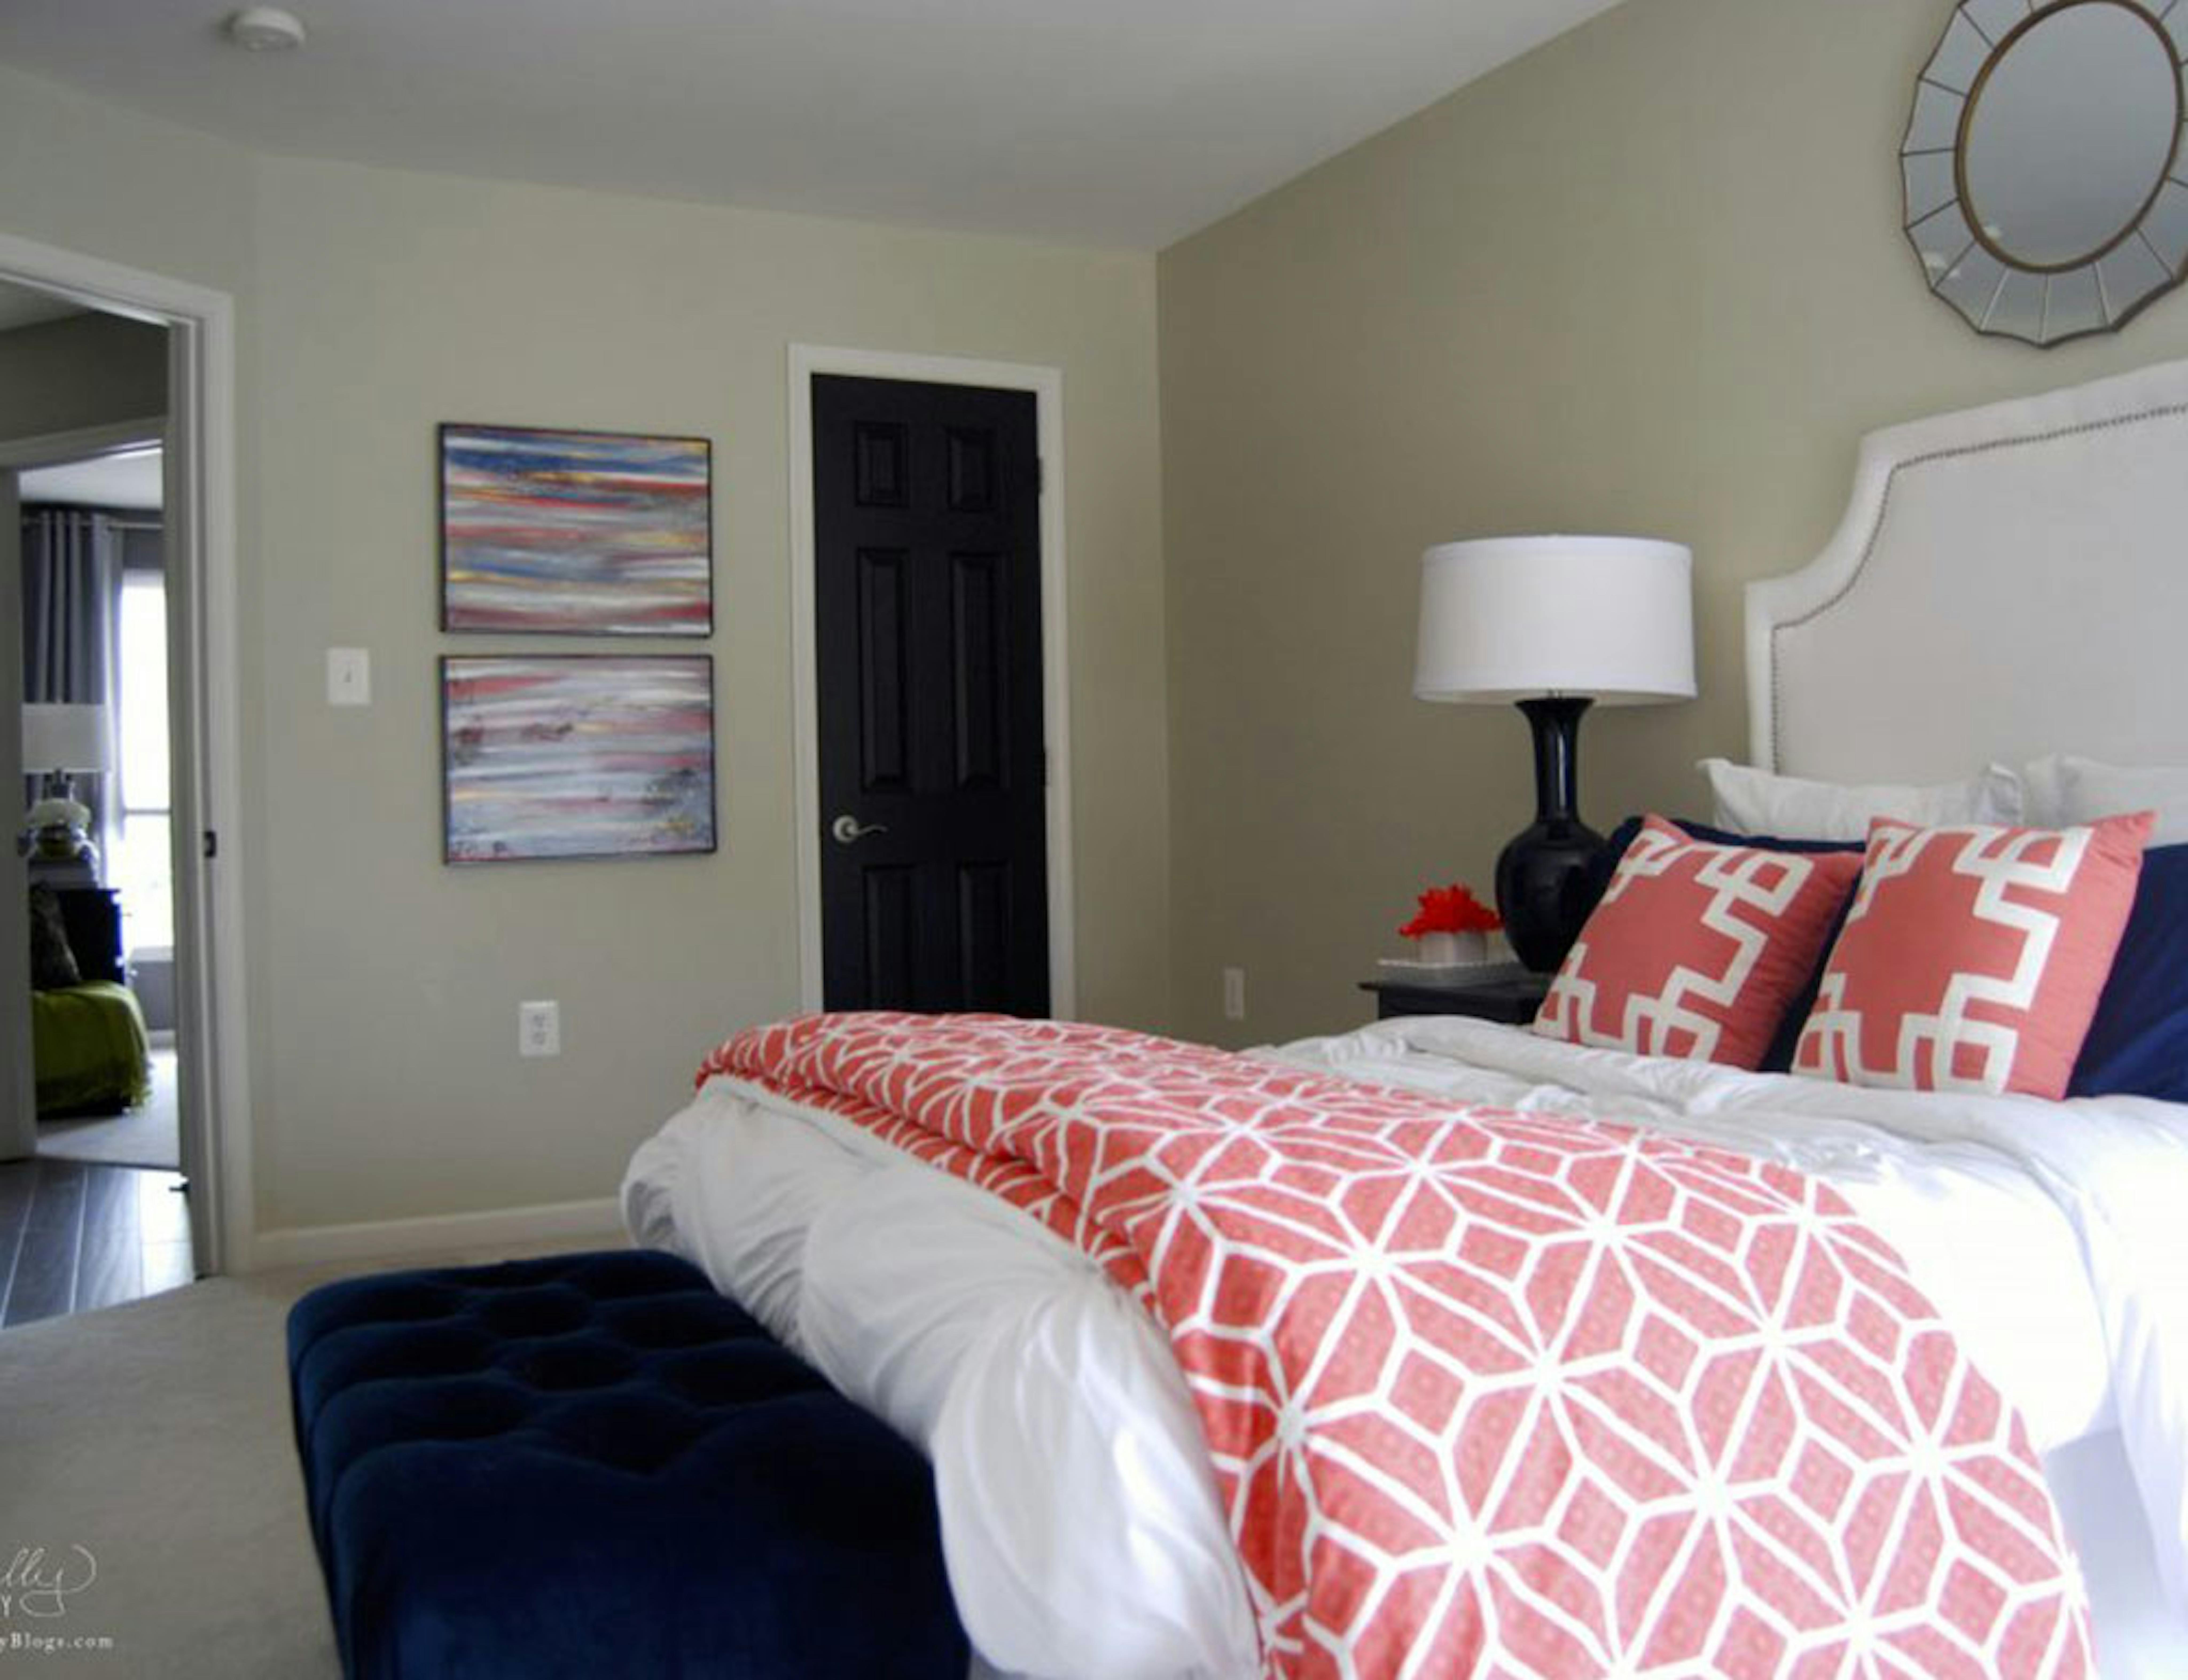 bedroom with coral bedding